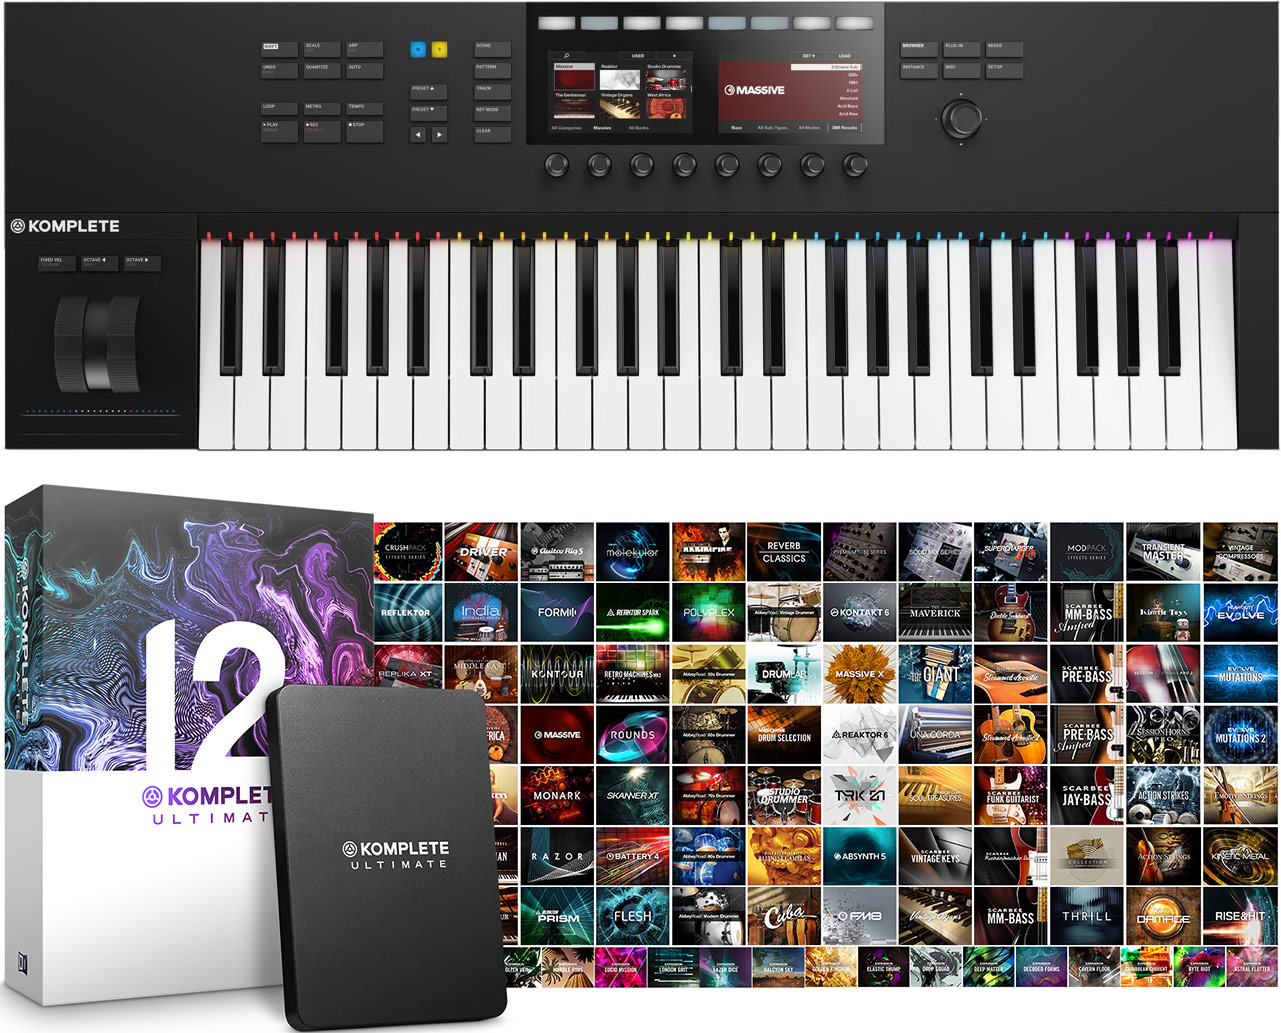 komplete 12 ultimate instruments not showing up